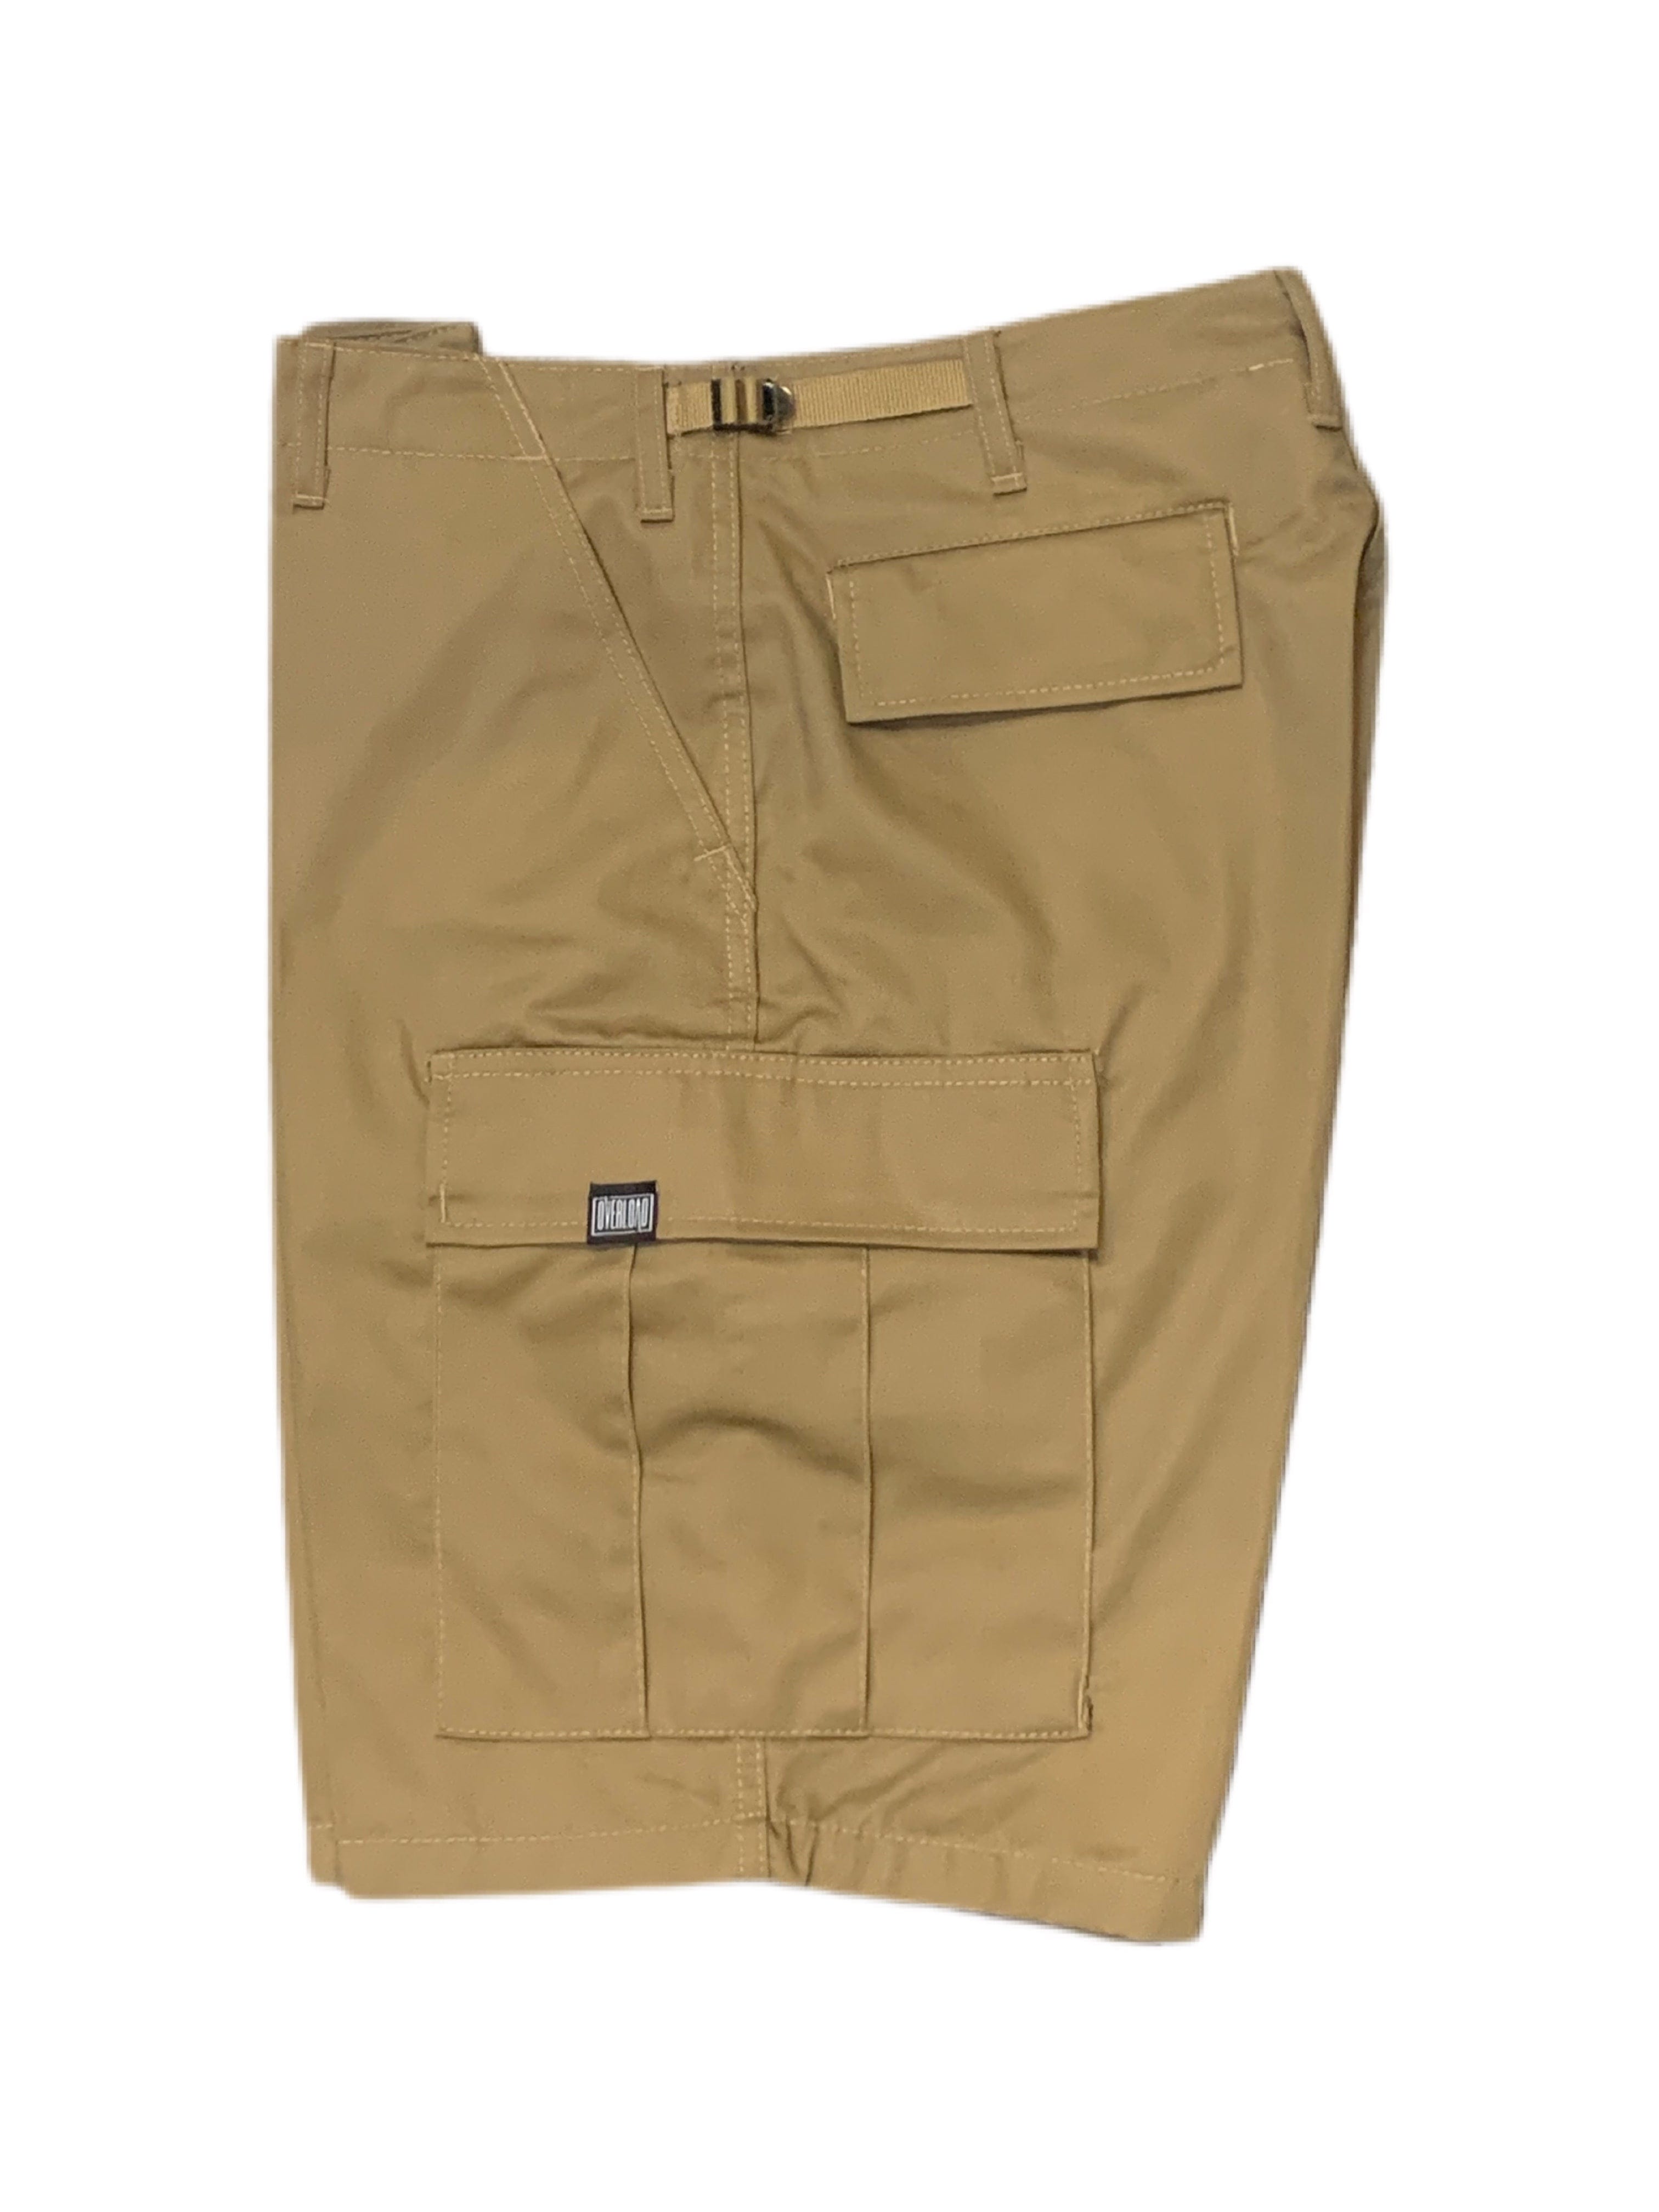 Overload Shorts Overload Cargo Shorts - Coyote Brown